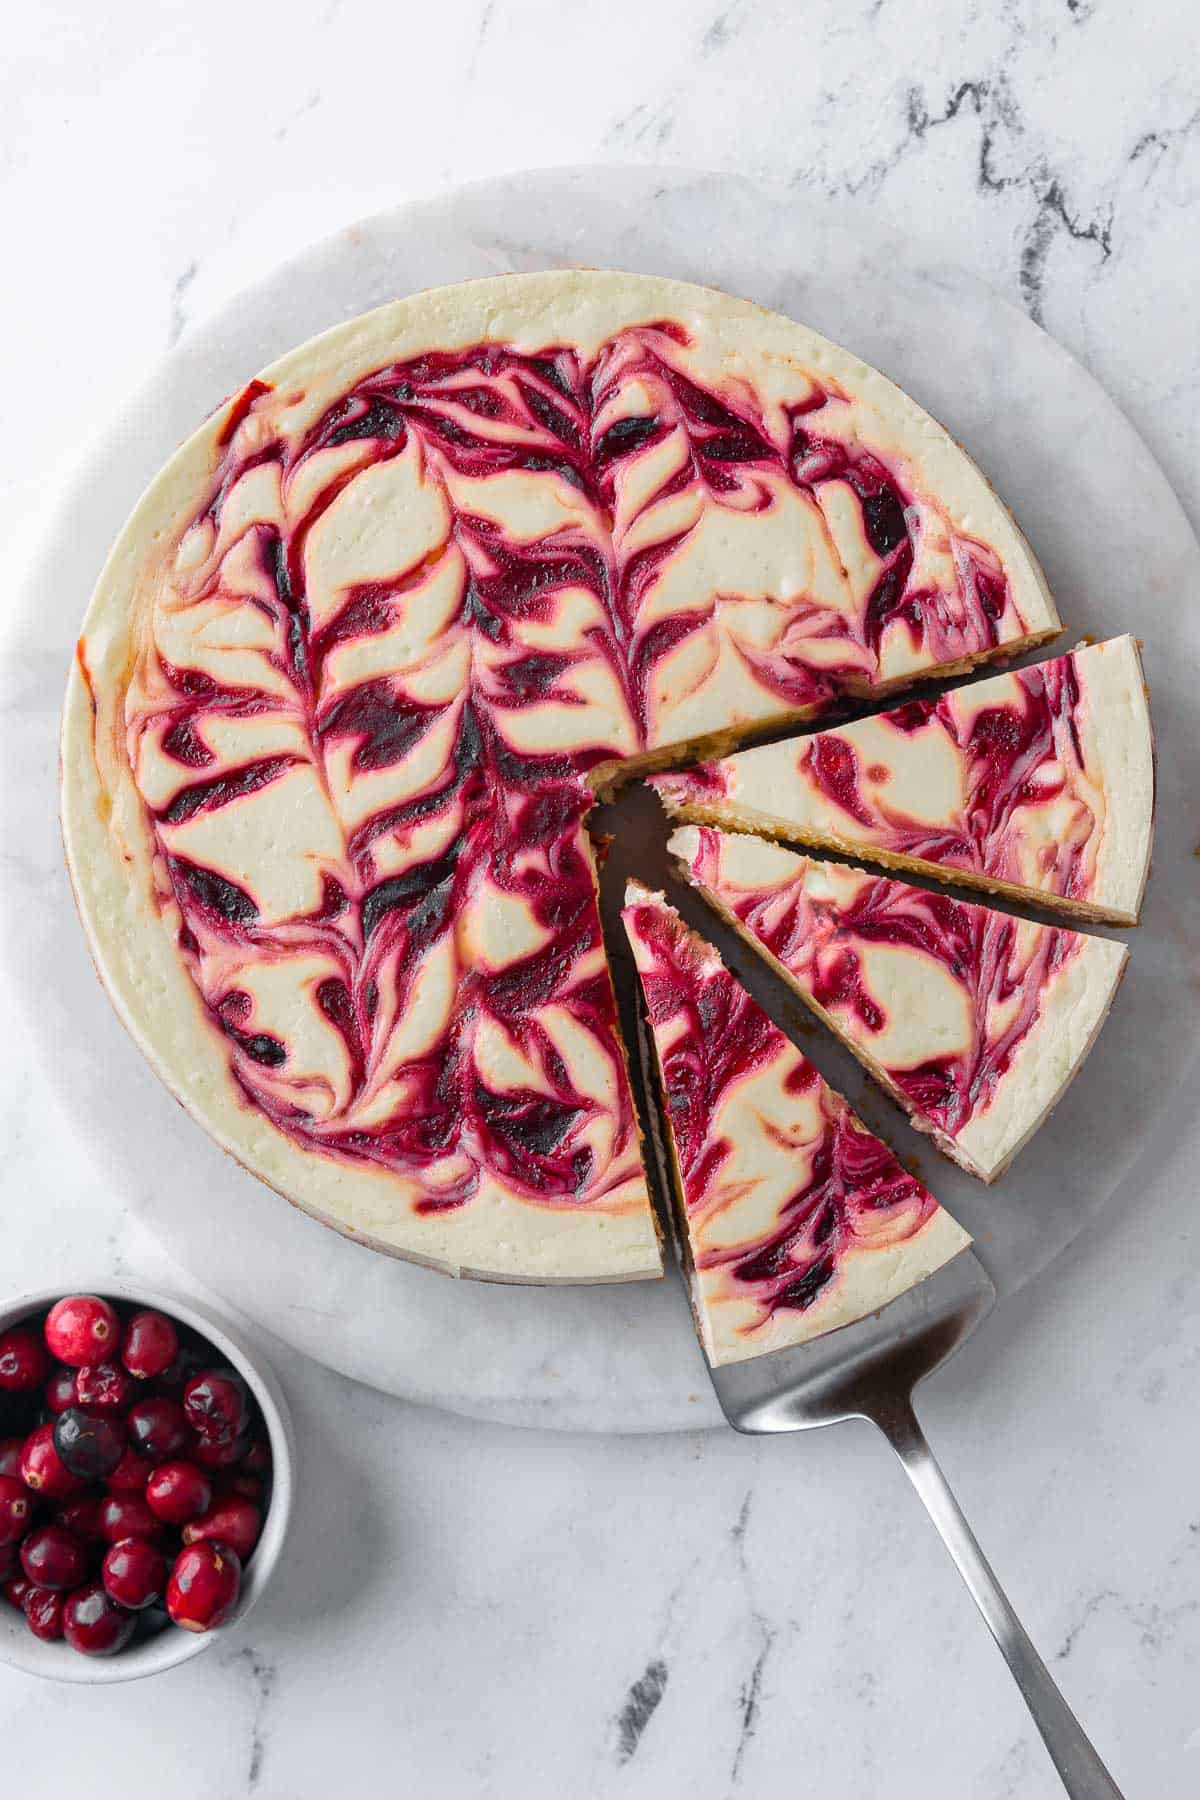 Cranberry cheese cake cut into slices with a serving on a small plate nearby and a small bowl of fresh cranberries nearby.